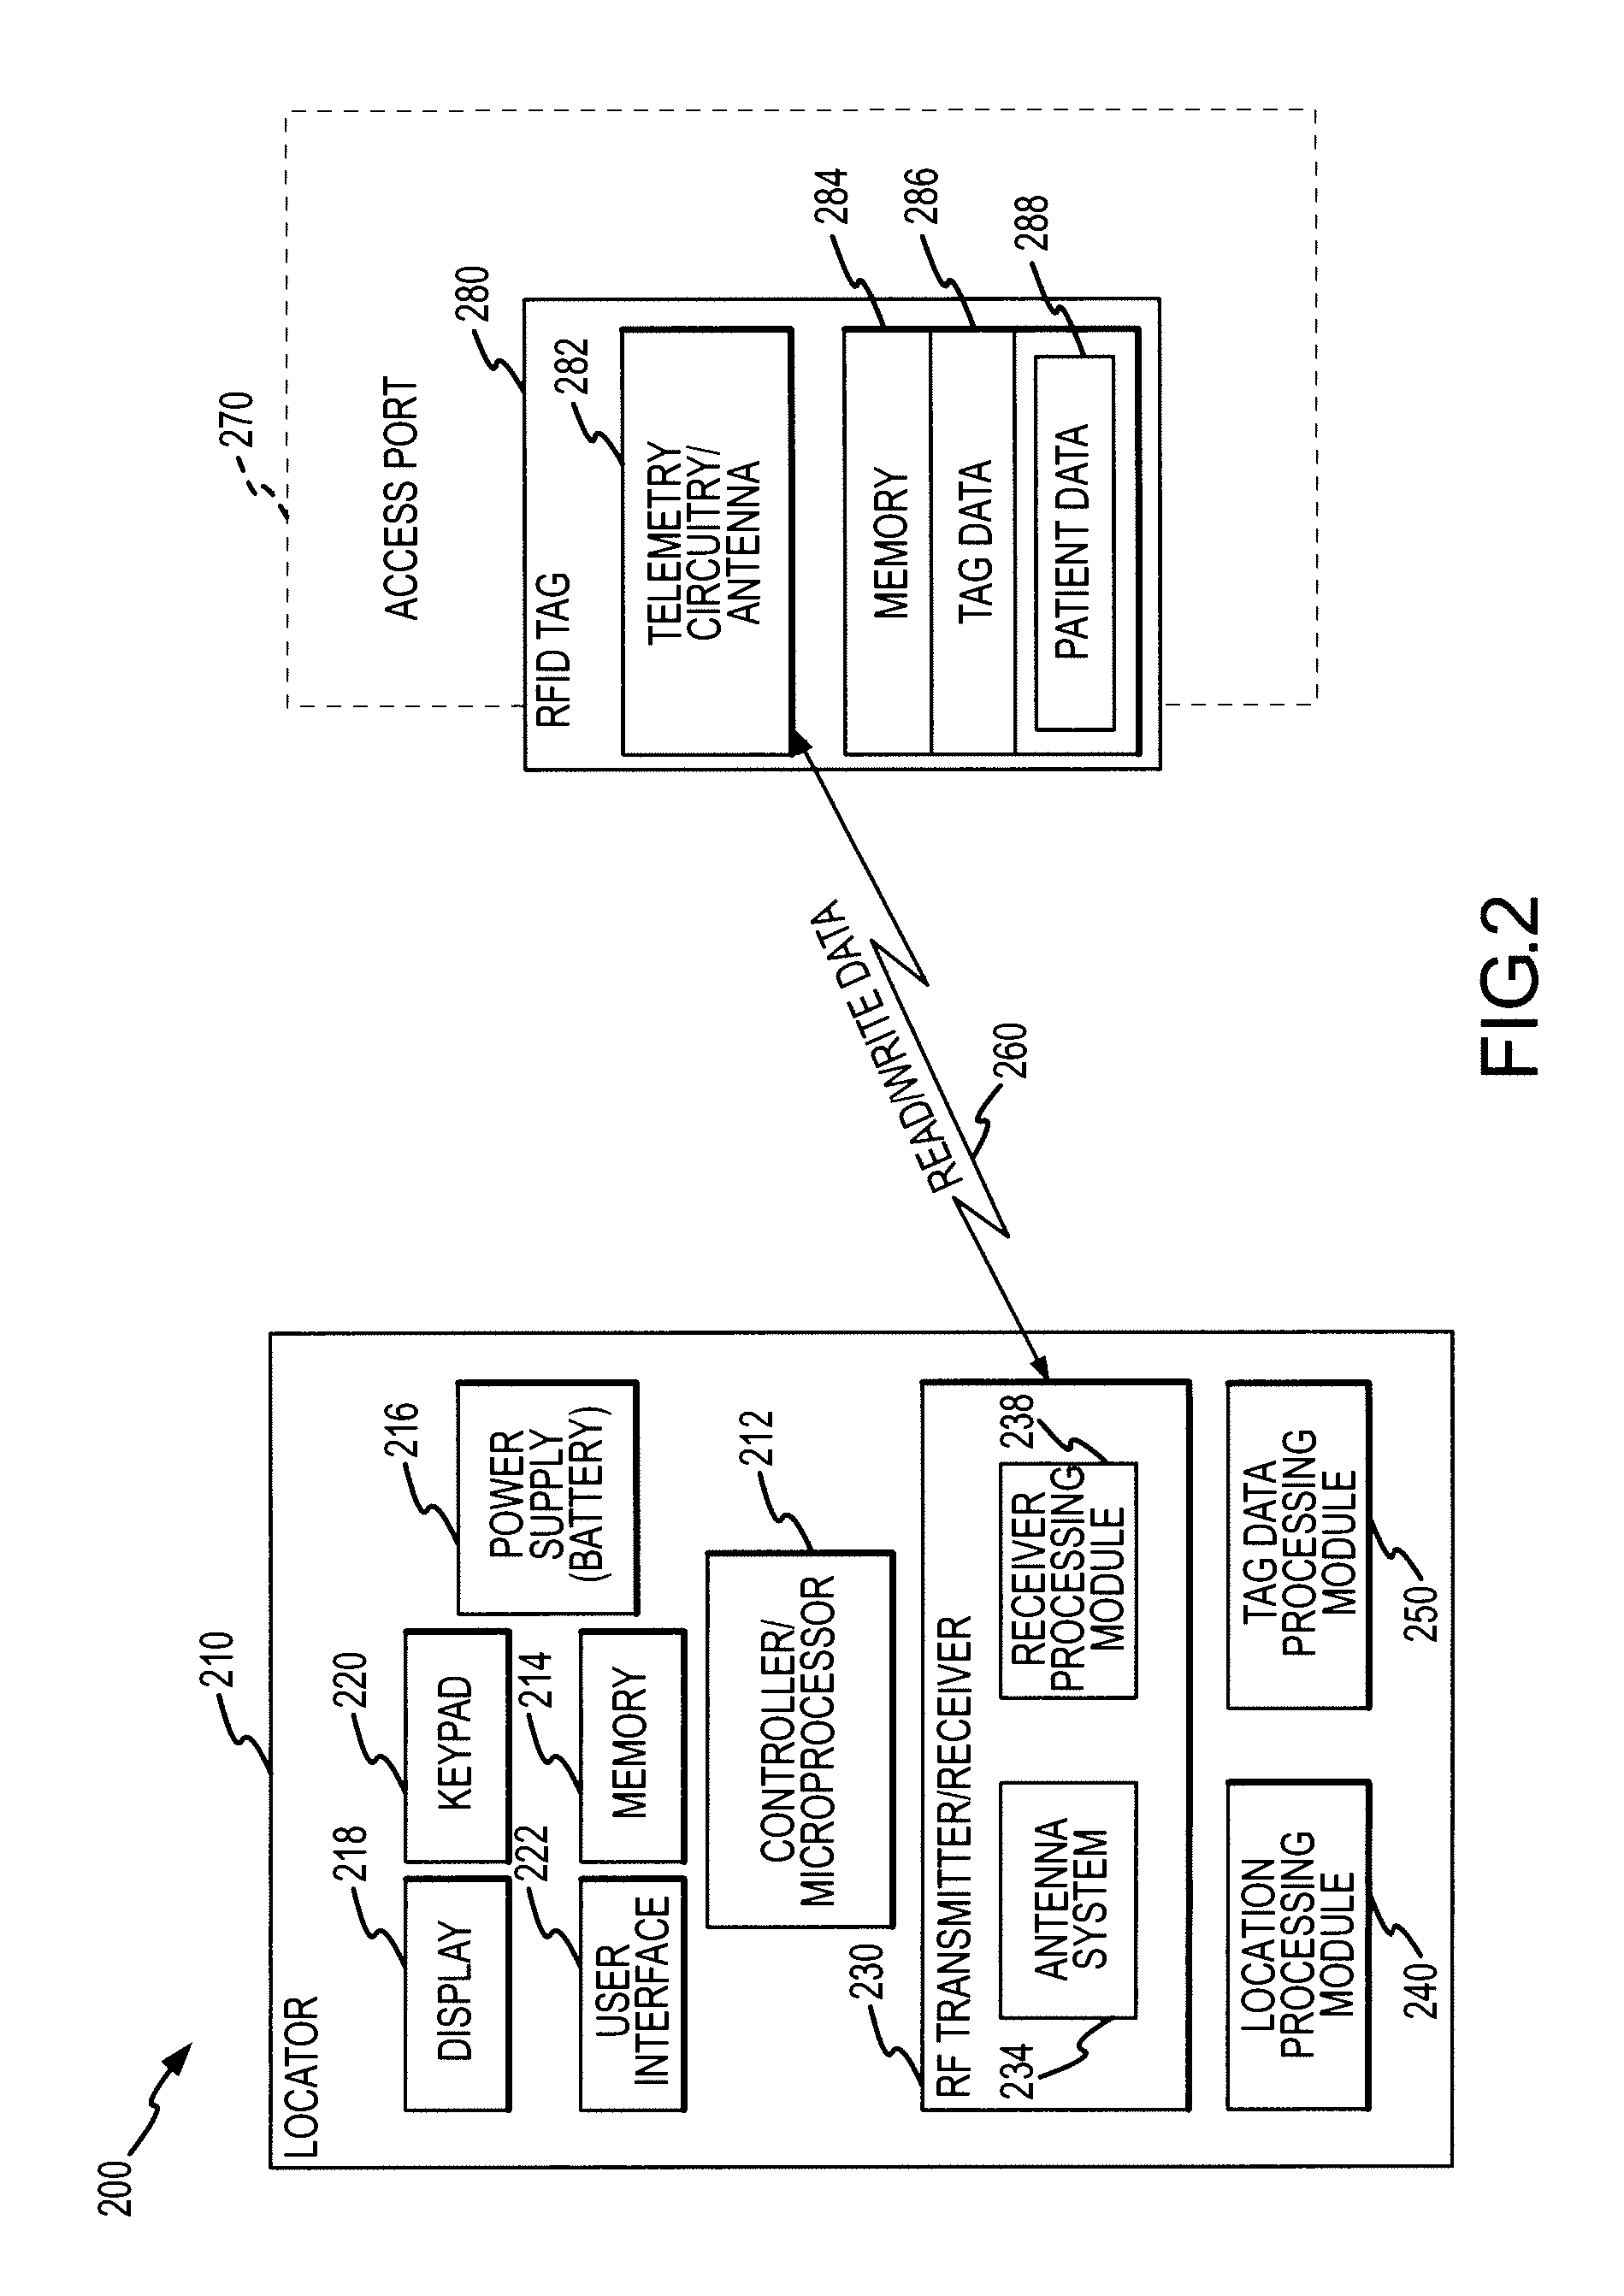 Method for locating an implanted fluid access port